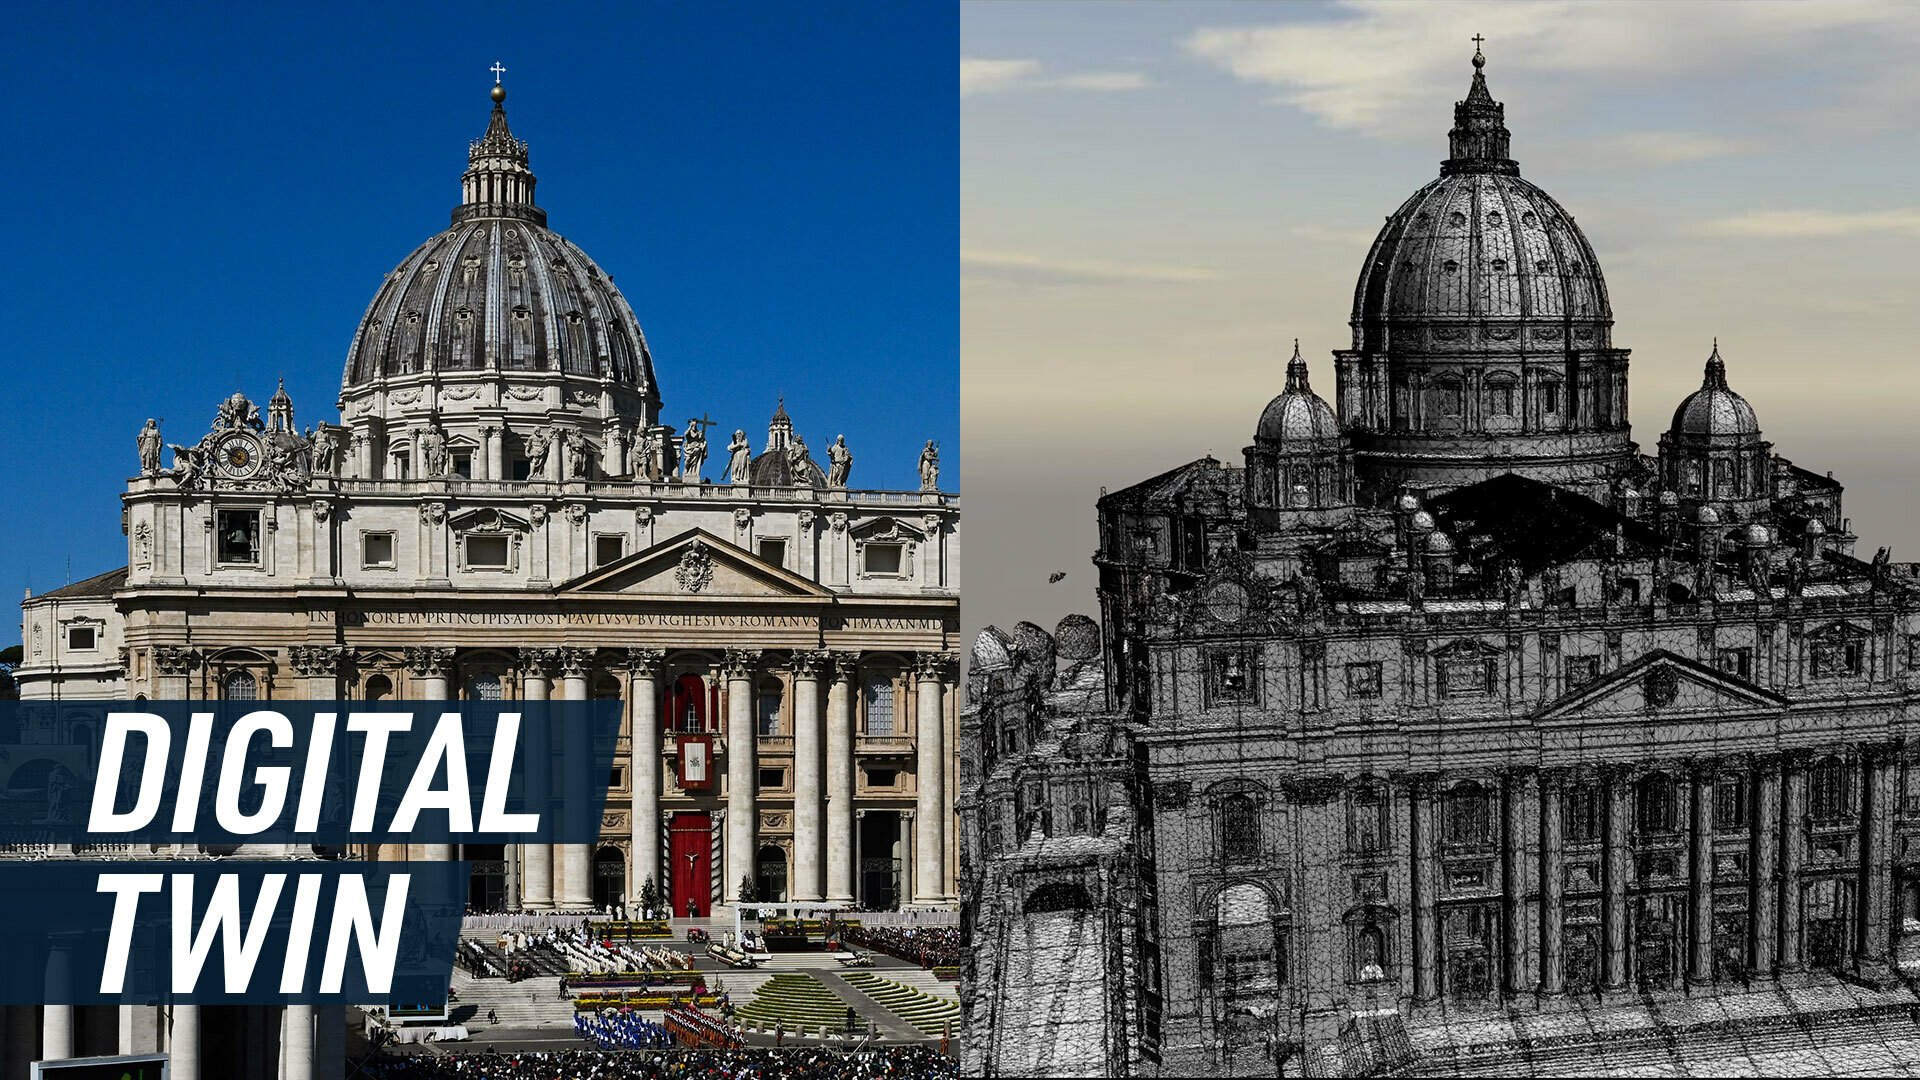 A split screen shows a photograph of St Peter's Basilica in Vatican city (left), juxtaposed with a B&W 3D render (right). Caption reads: 